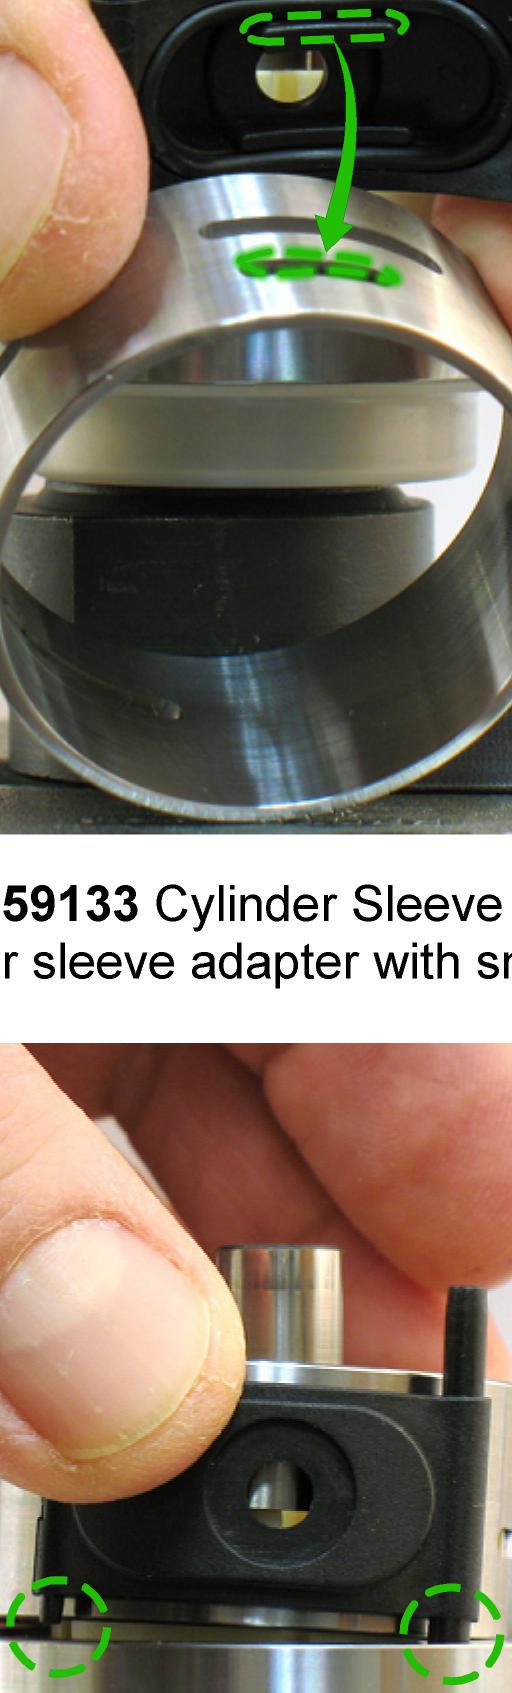 8. Install 59134 Cylinder Sleeve and 59133